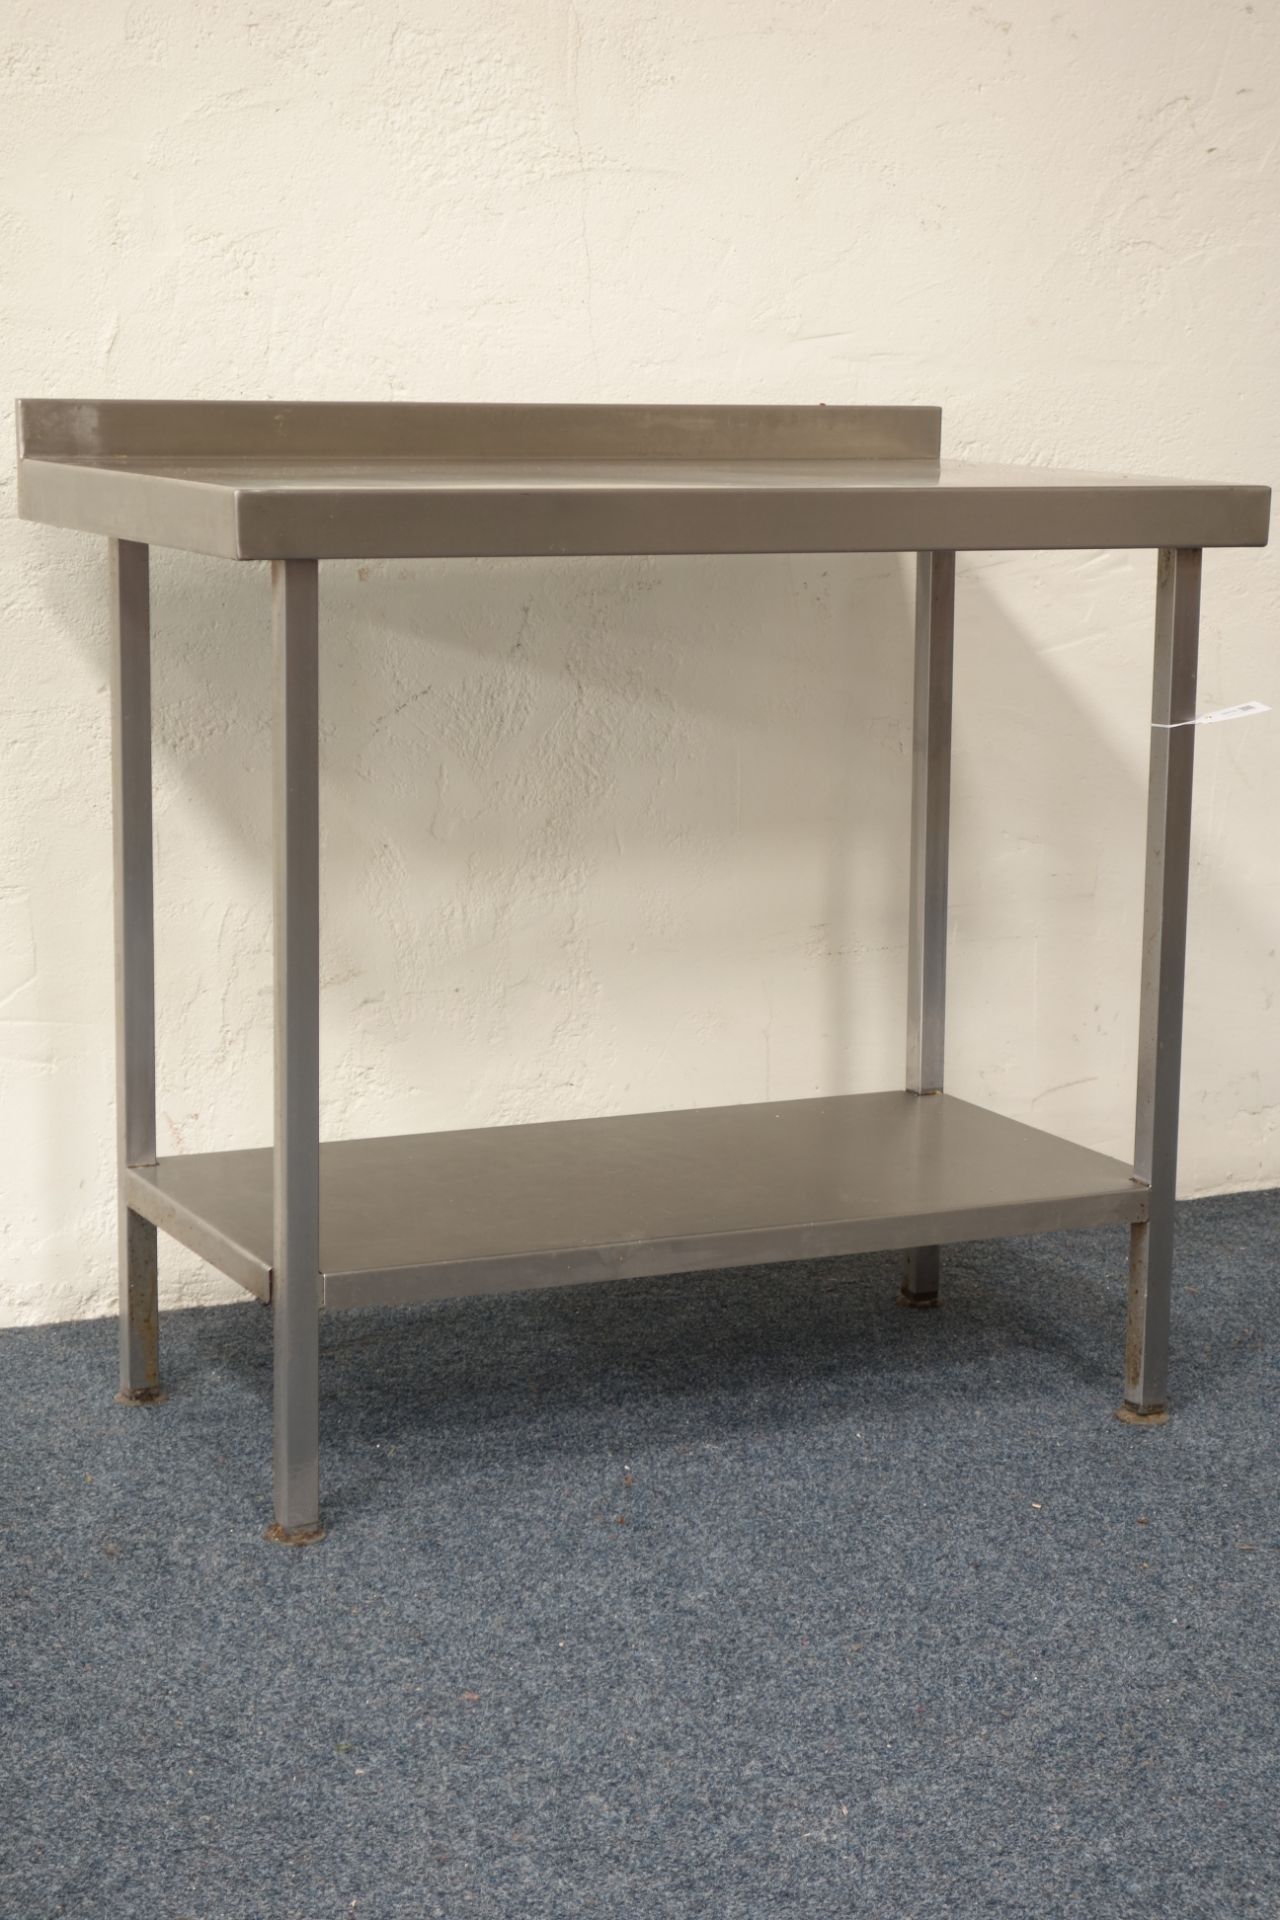 Commercial stainless steel two tier preparation table with raised back, 100cm x 60cm,